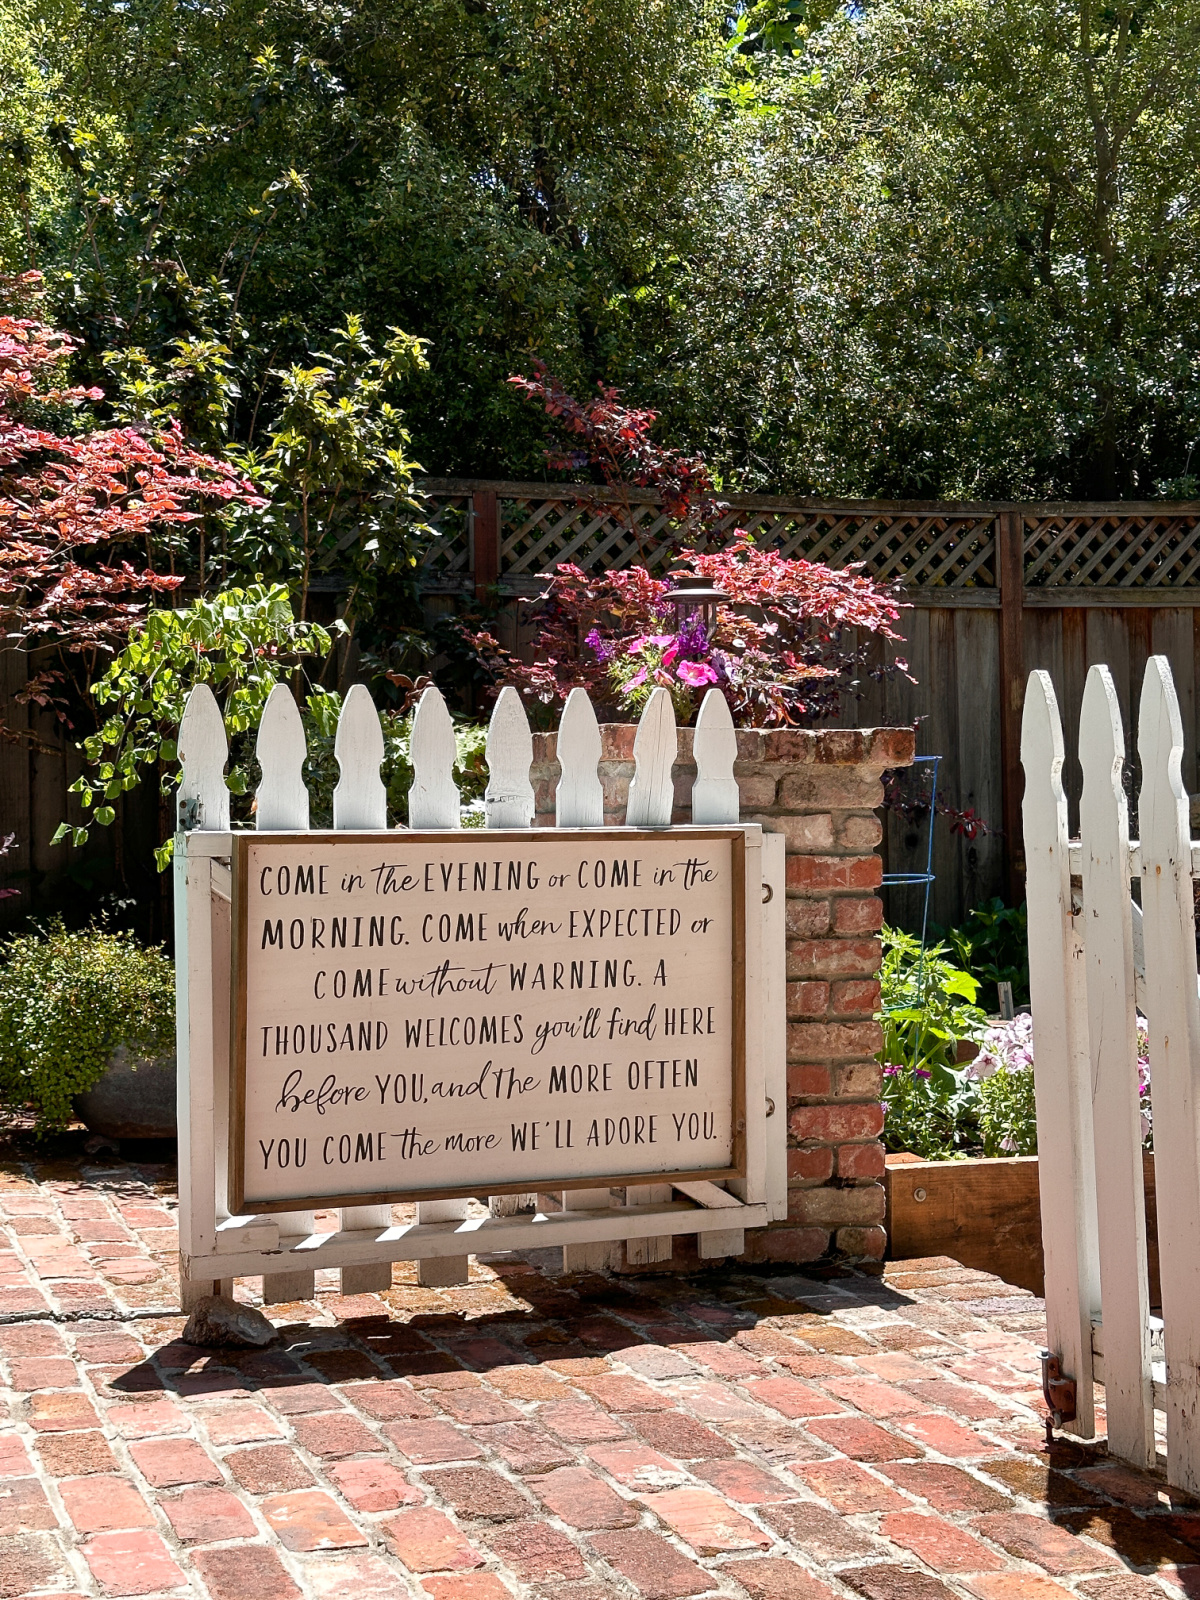 White picket garden gate at entrance to raised bed kitchen garden, with sweet poem.